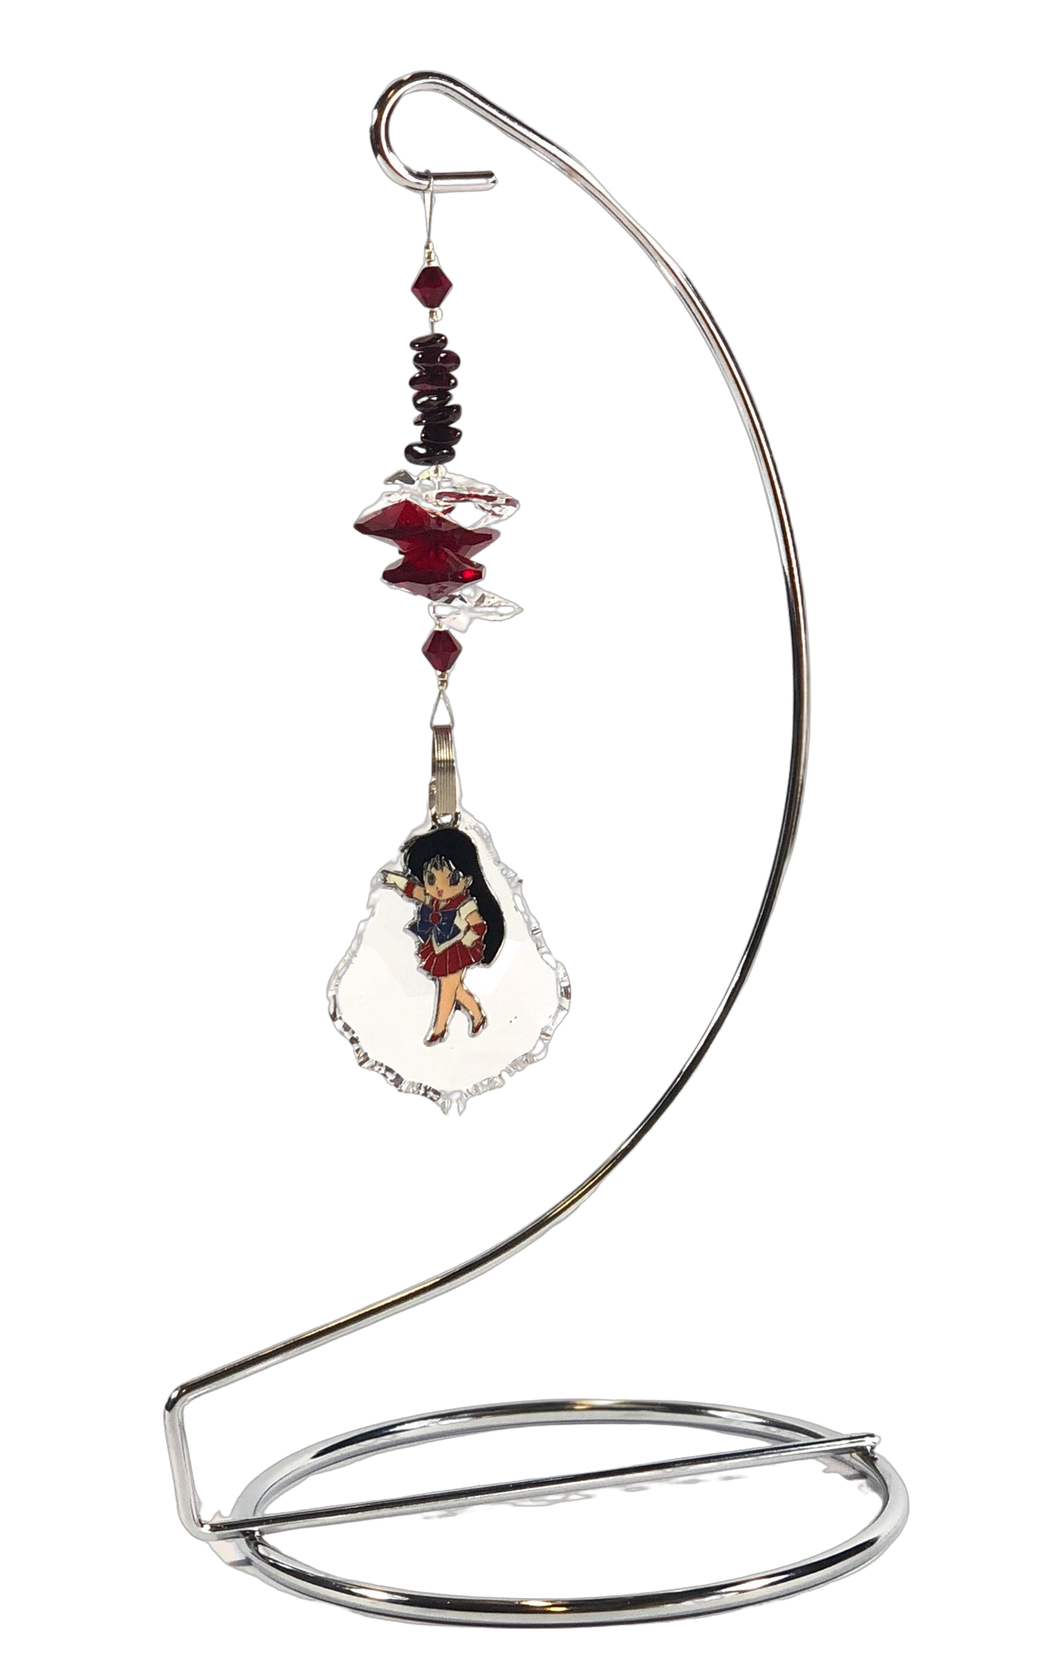 Sailor Moon - Sailor Mars crystal suncatcher is decorated with garnet gemstones and come on this amazing stand.